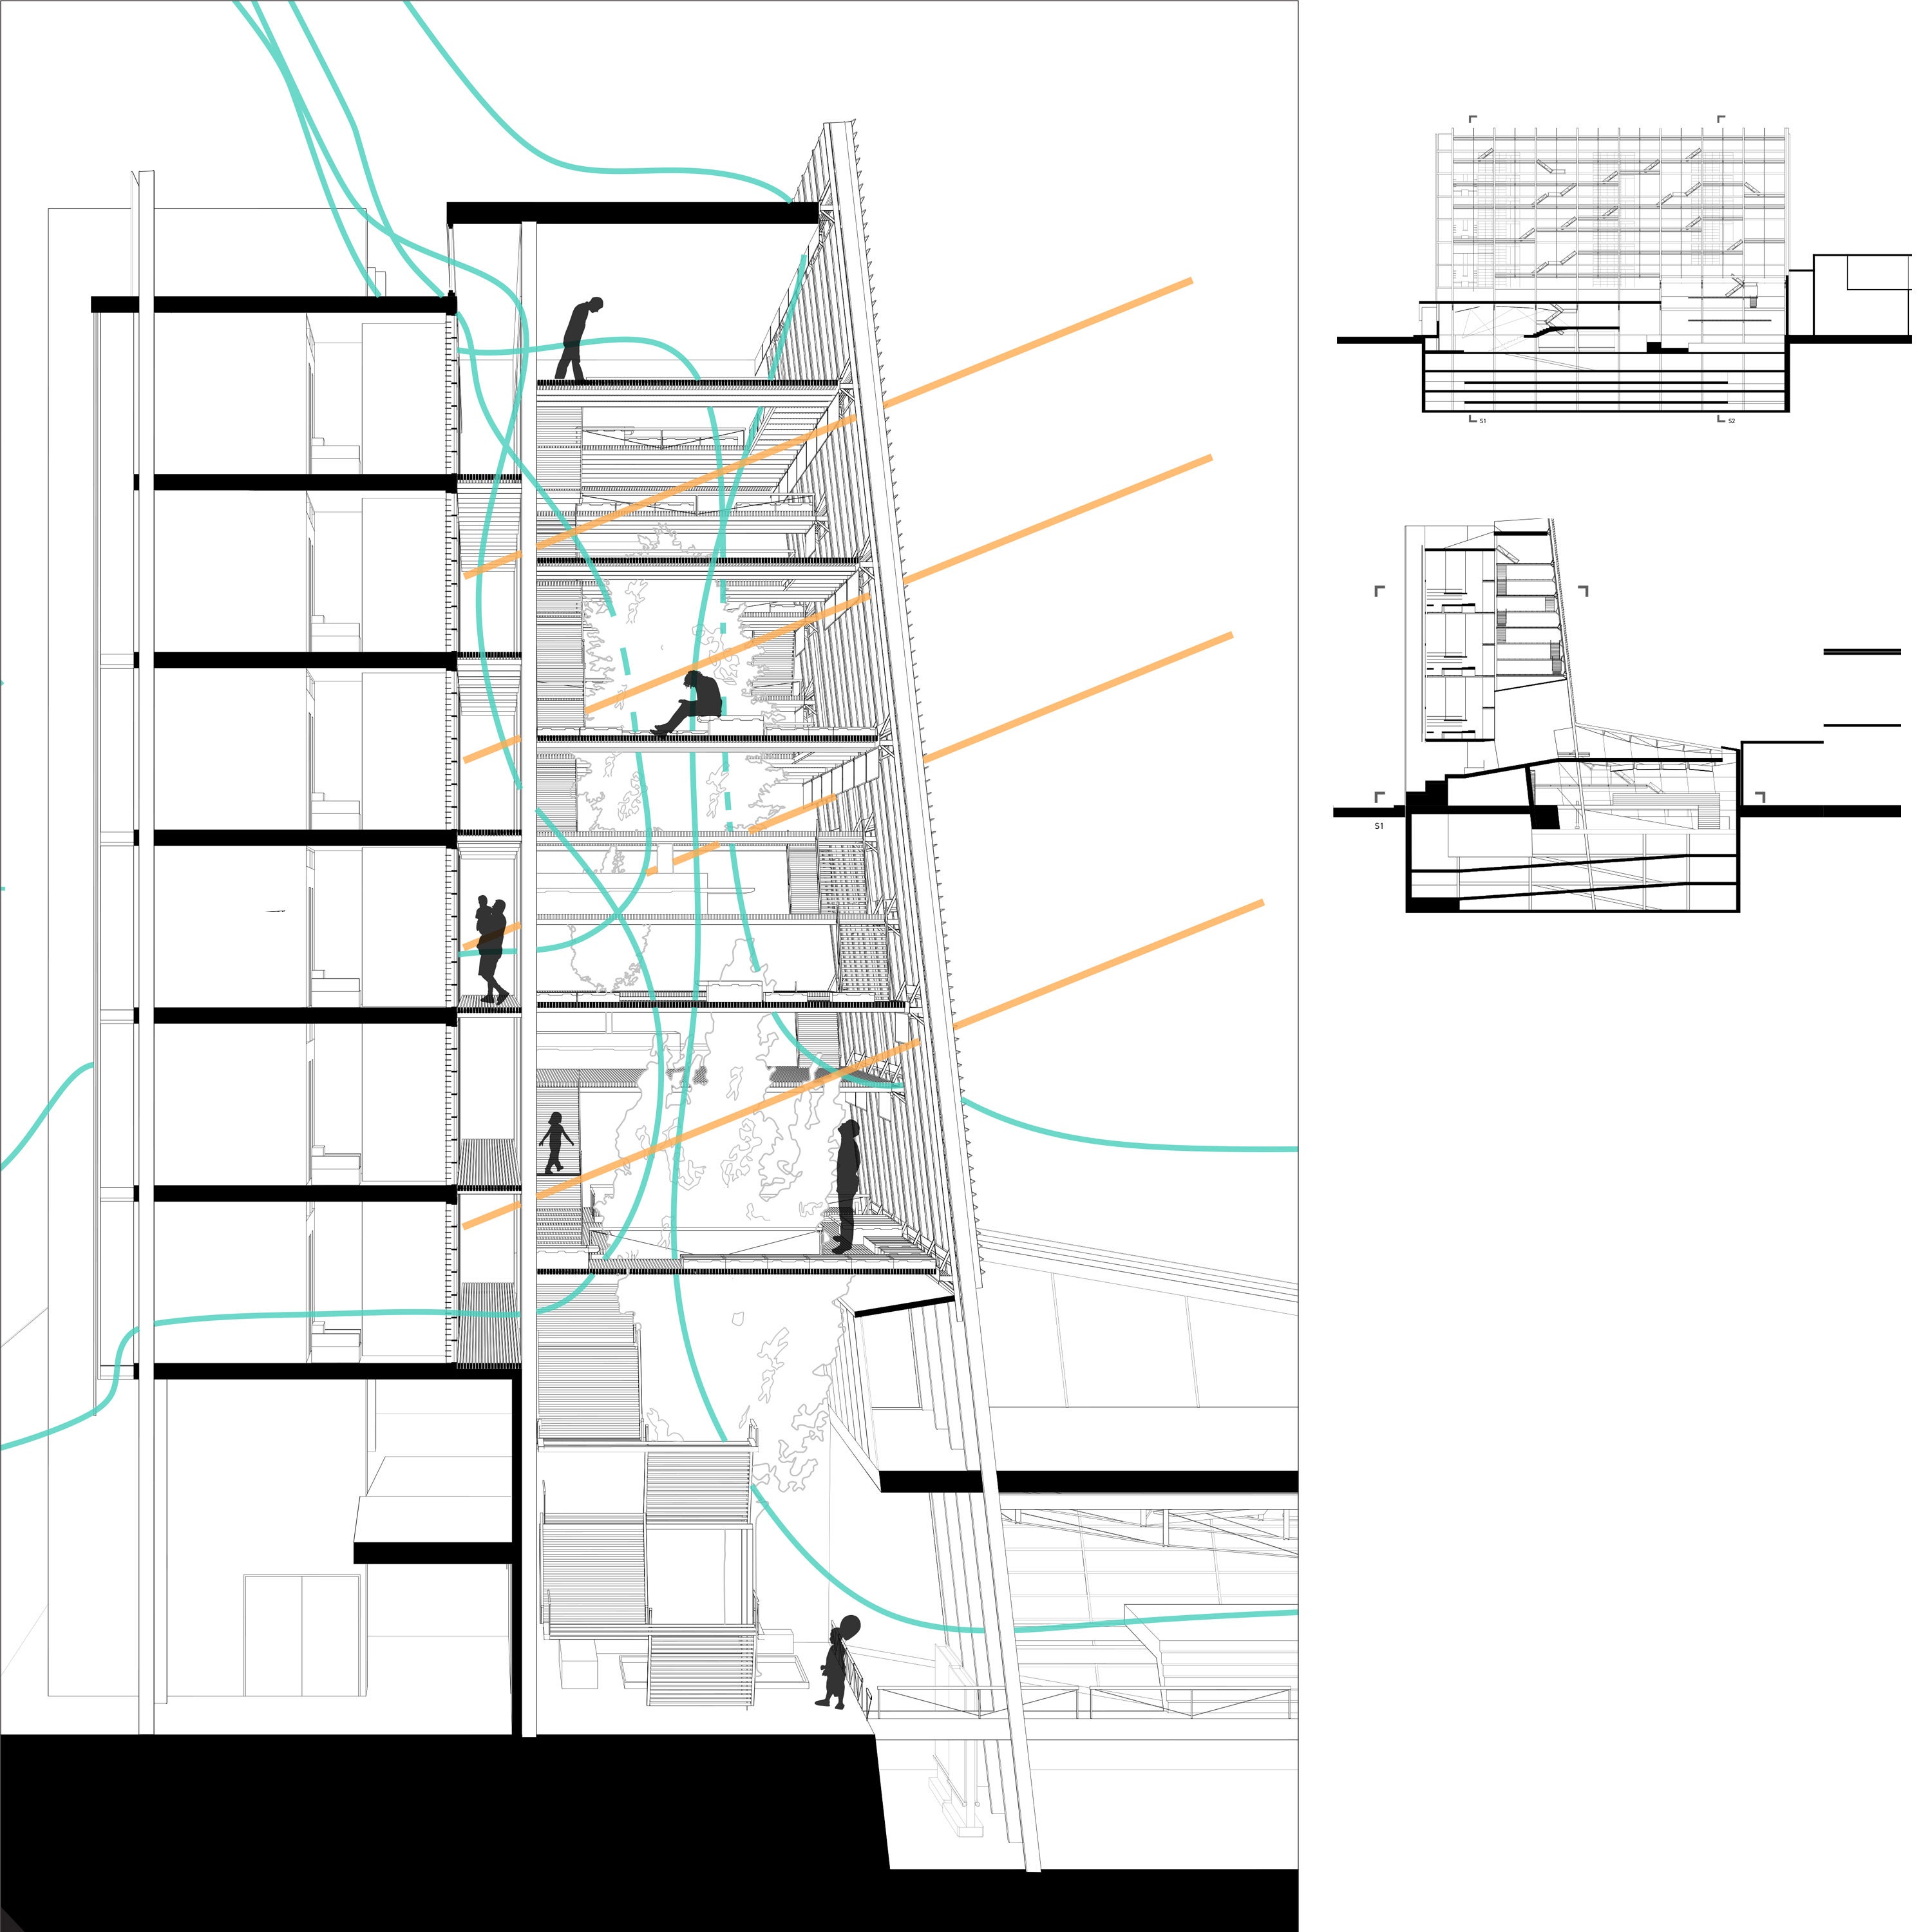 A sectional perspective drawing explaining the ventilation and sunlight penetration through the glass façade.